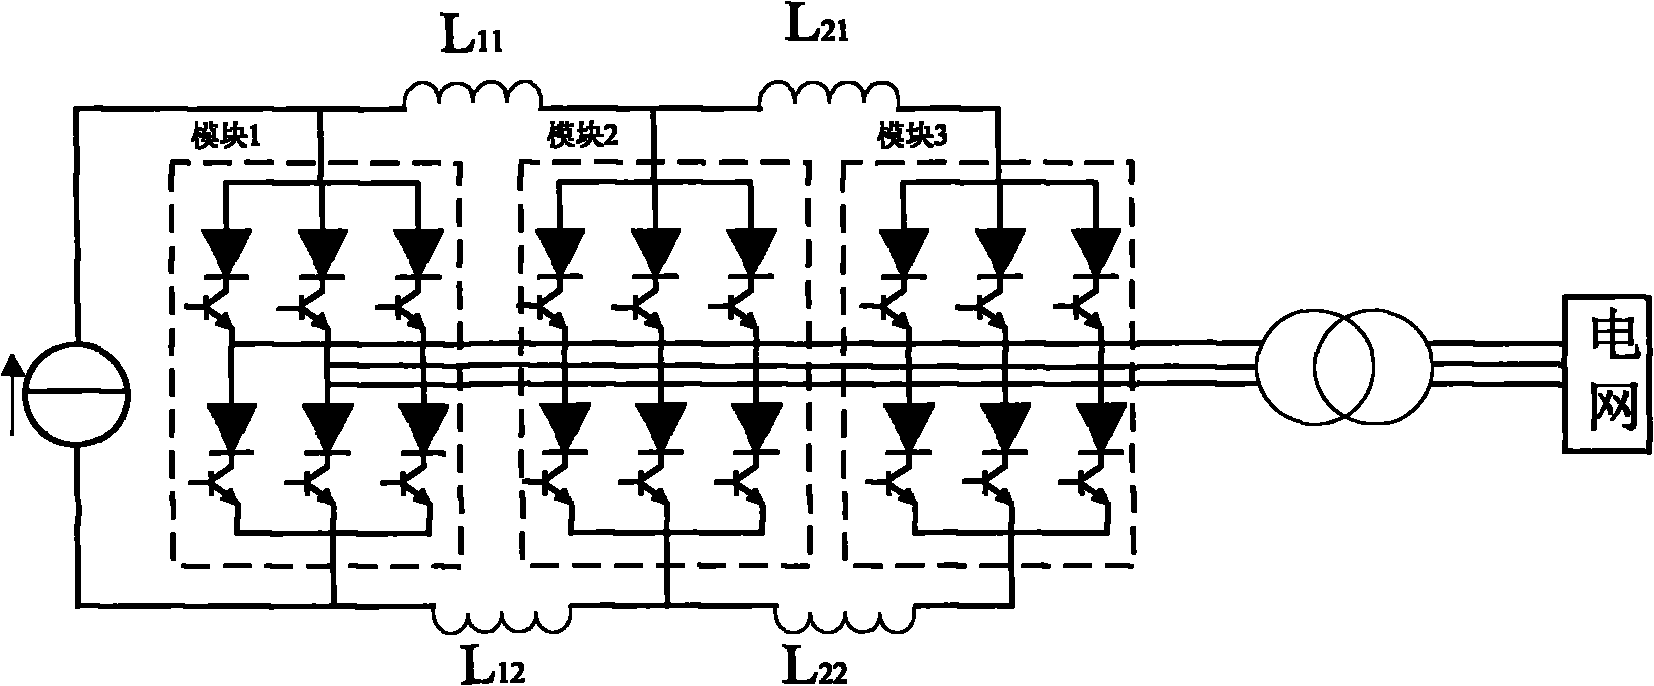 Current-type multi-level converter system for wind power integration